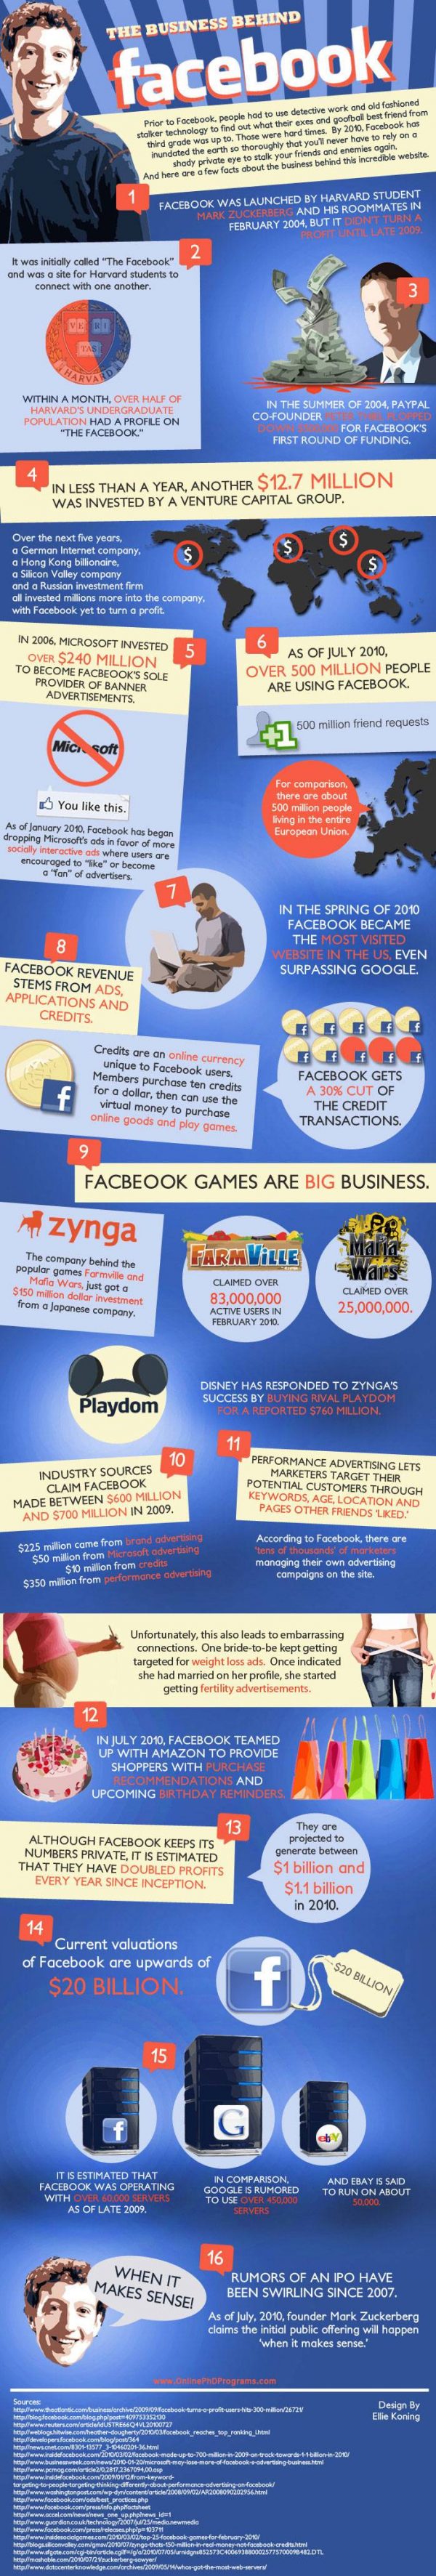 The Business Behind Facebook (Infographic)